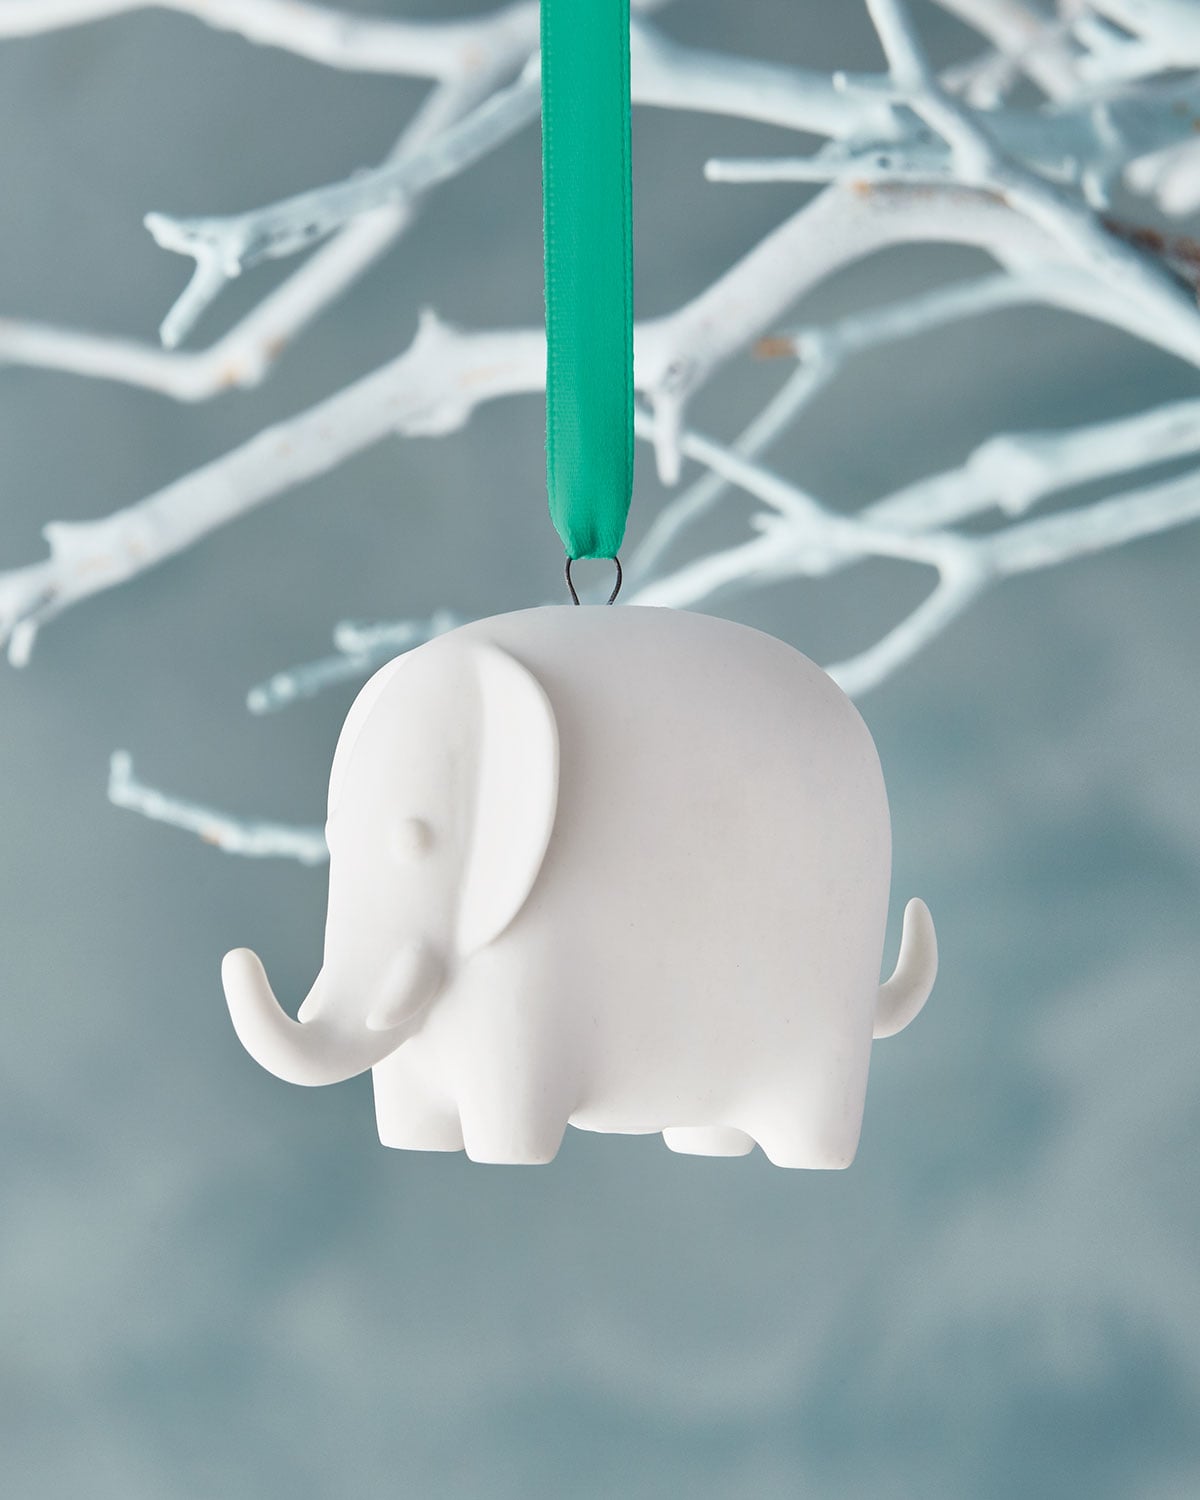 30 Top Pictures Elephant Christmas Tree Decorations - Elephant With Baby Porcelain Christmas Tree Ornaments Etsy